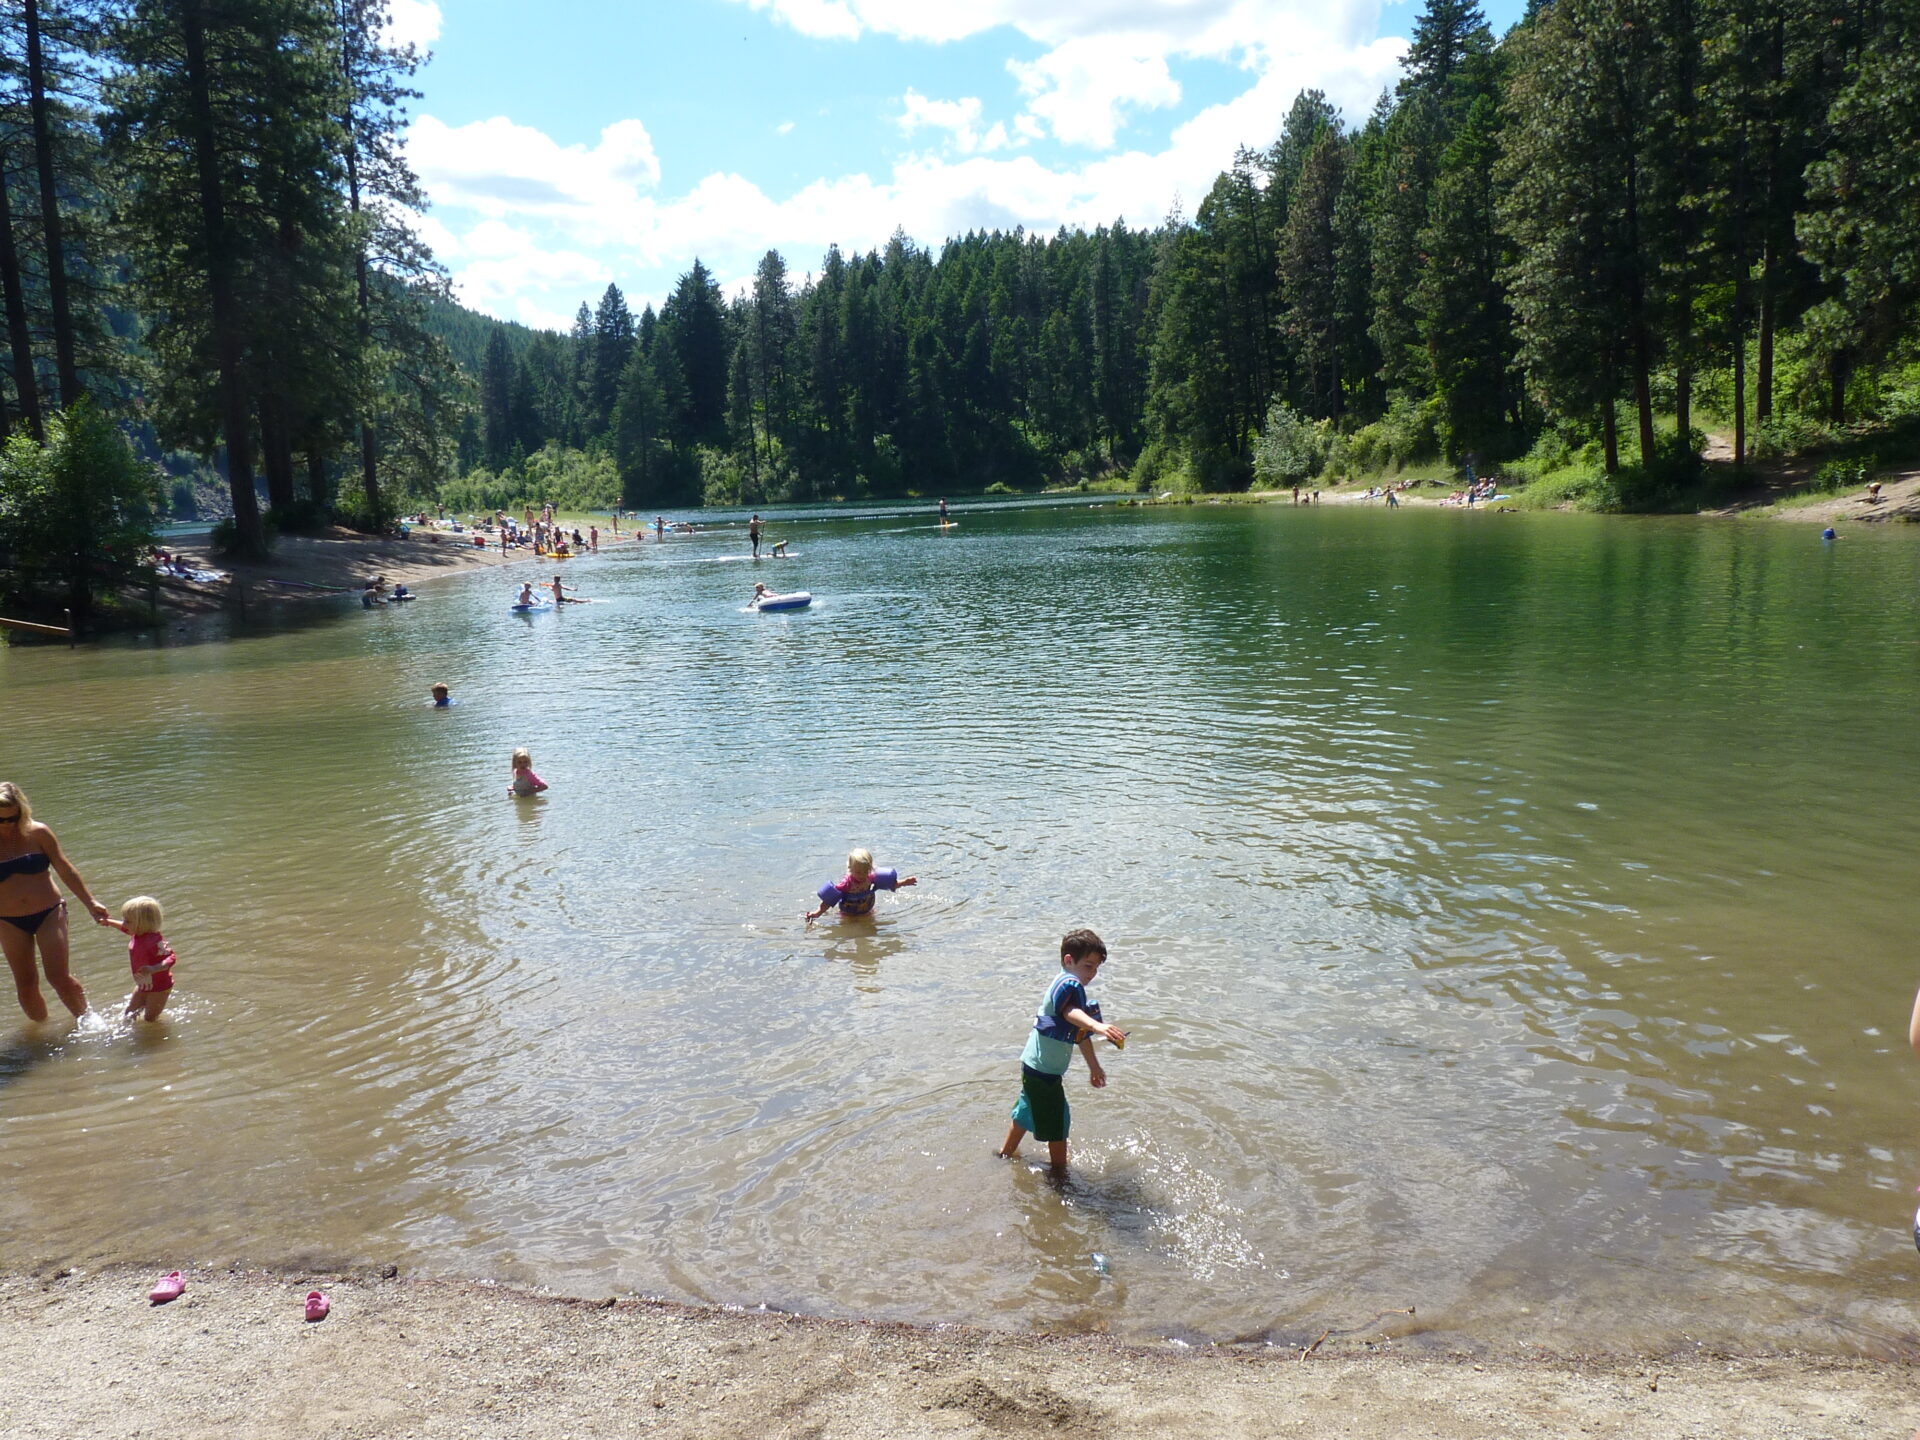 Swimming beach at Farragut State Park, with children and adults swimming, floating on tubes, and paddling.